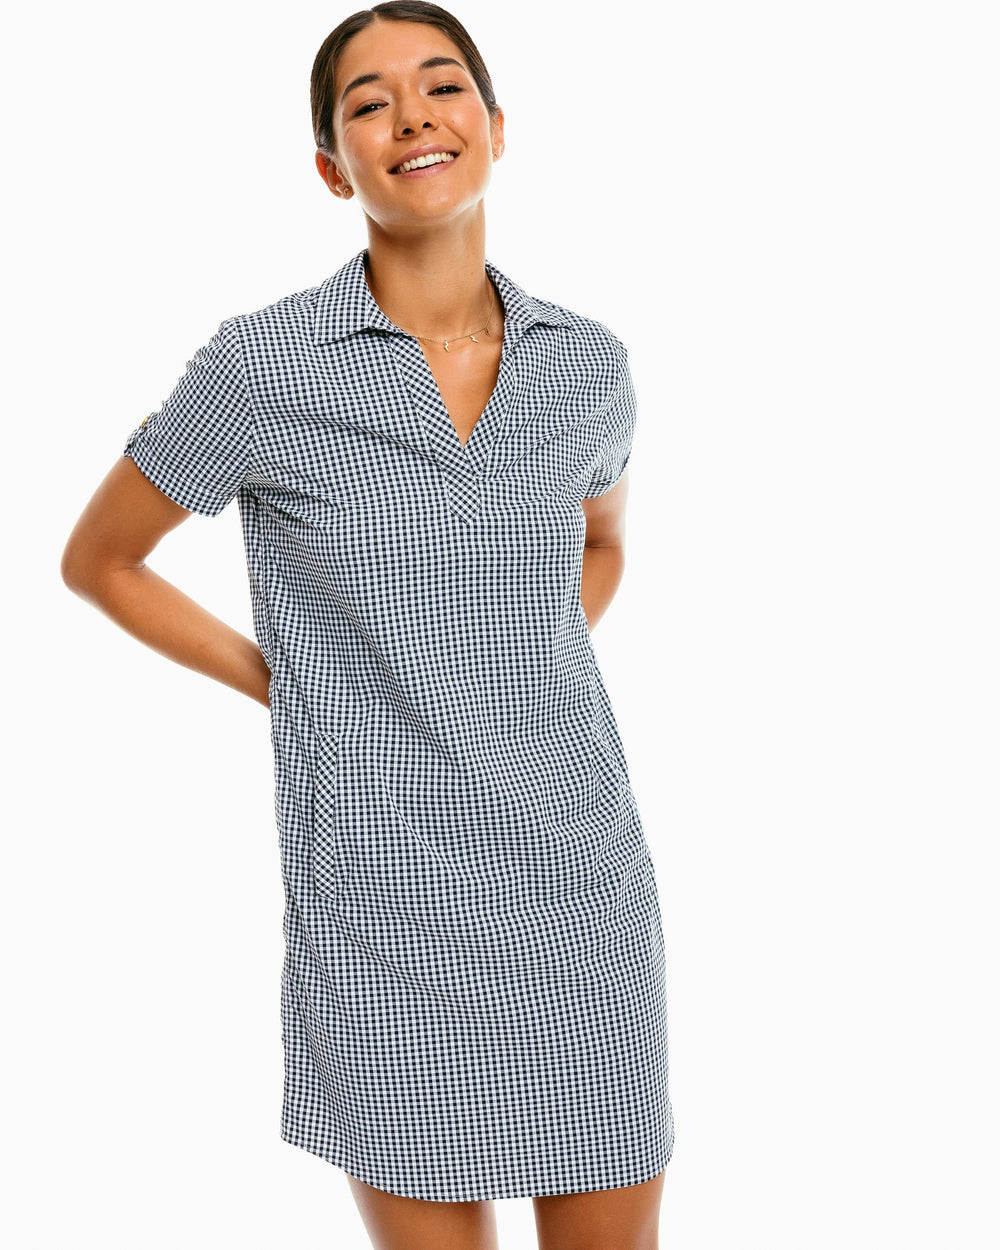 The front of the Women's Gameday Kamryn Intercoastal Shirt Dress by Southern Tide - Black